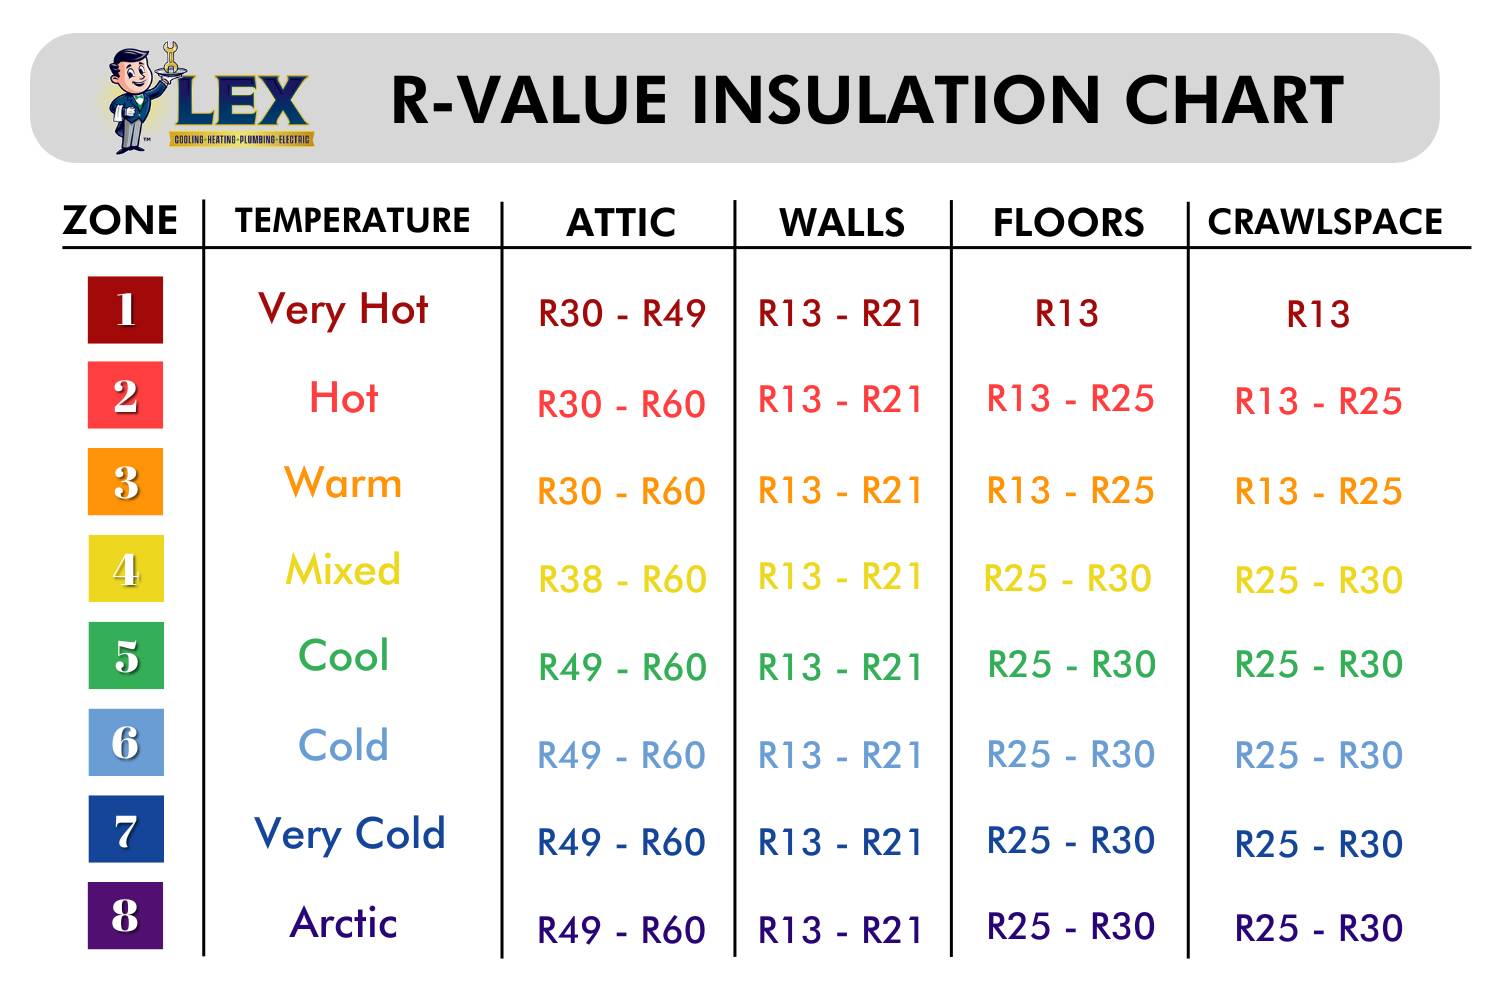 R-Value Insulation Chart